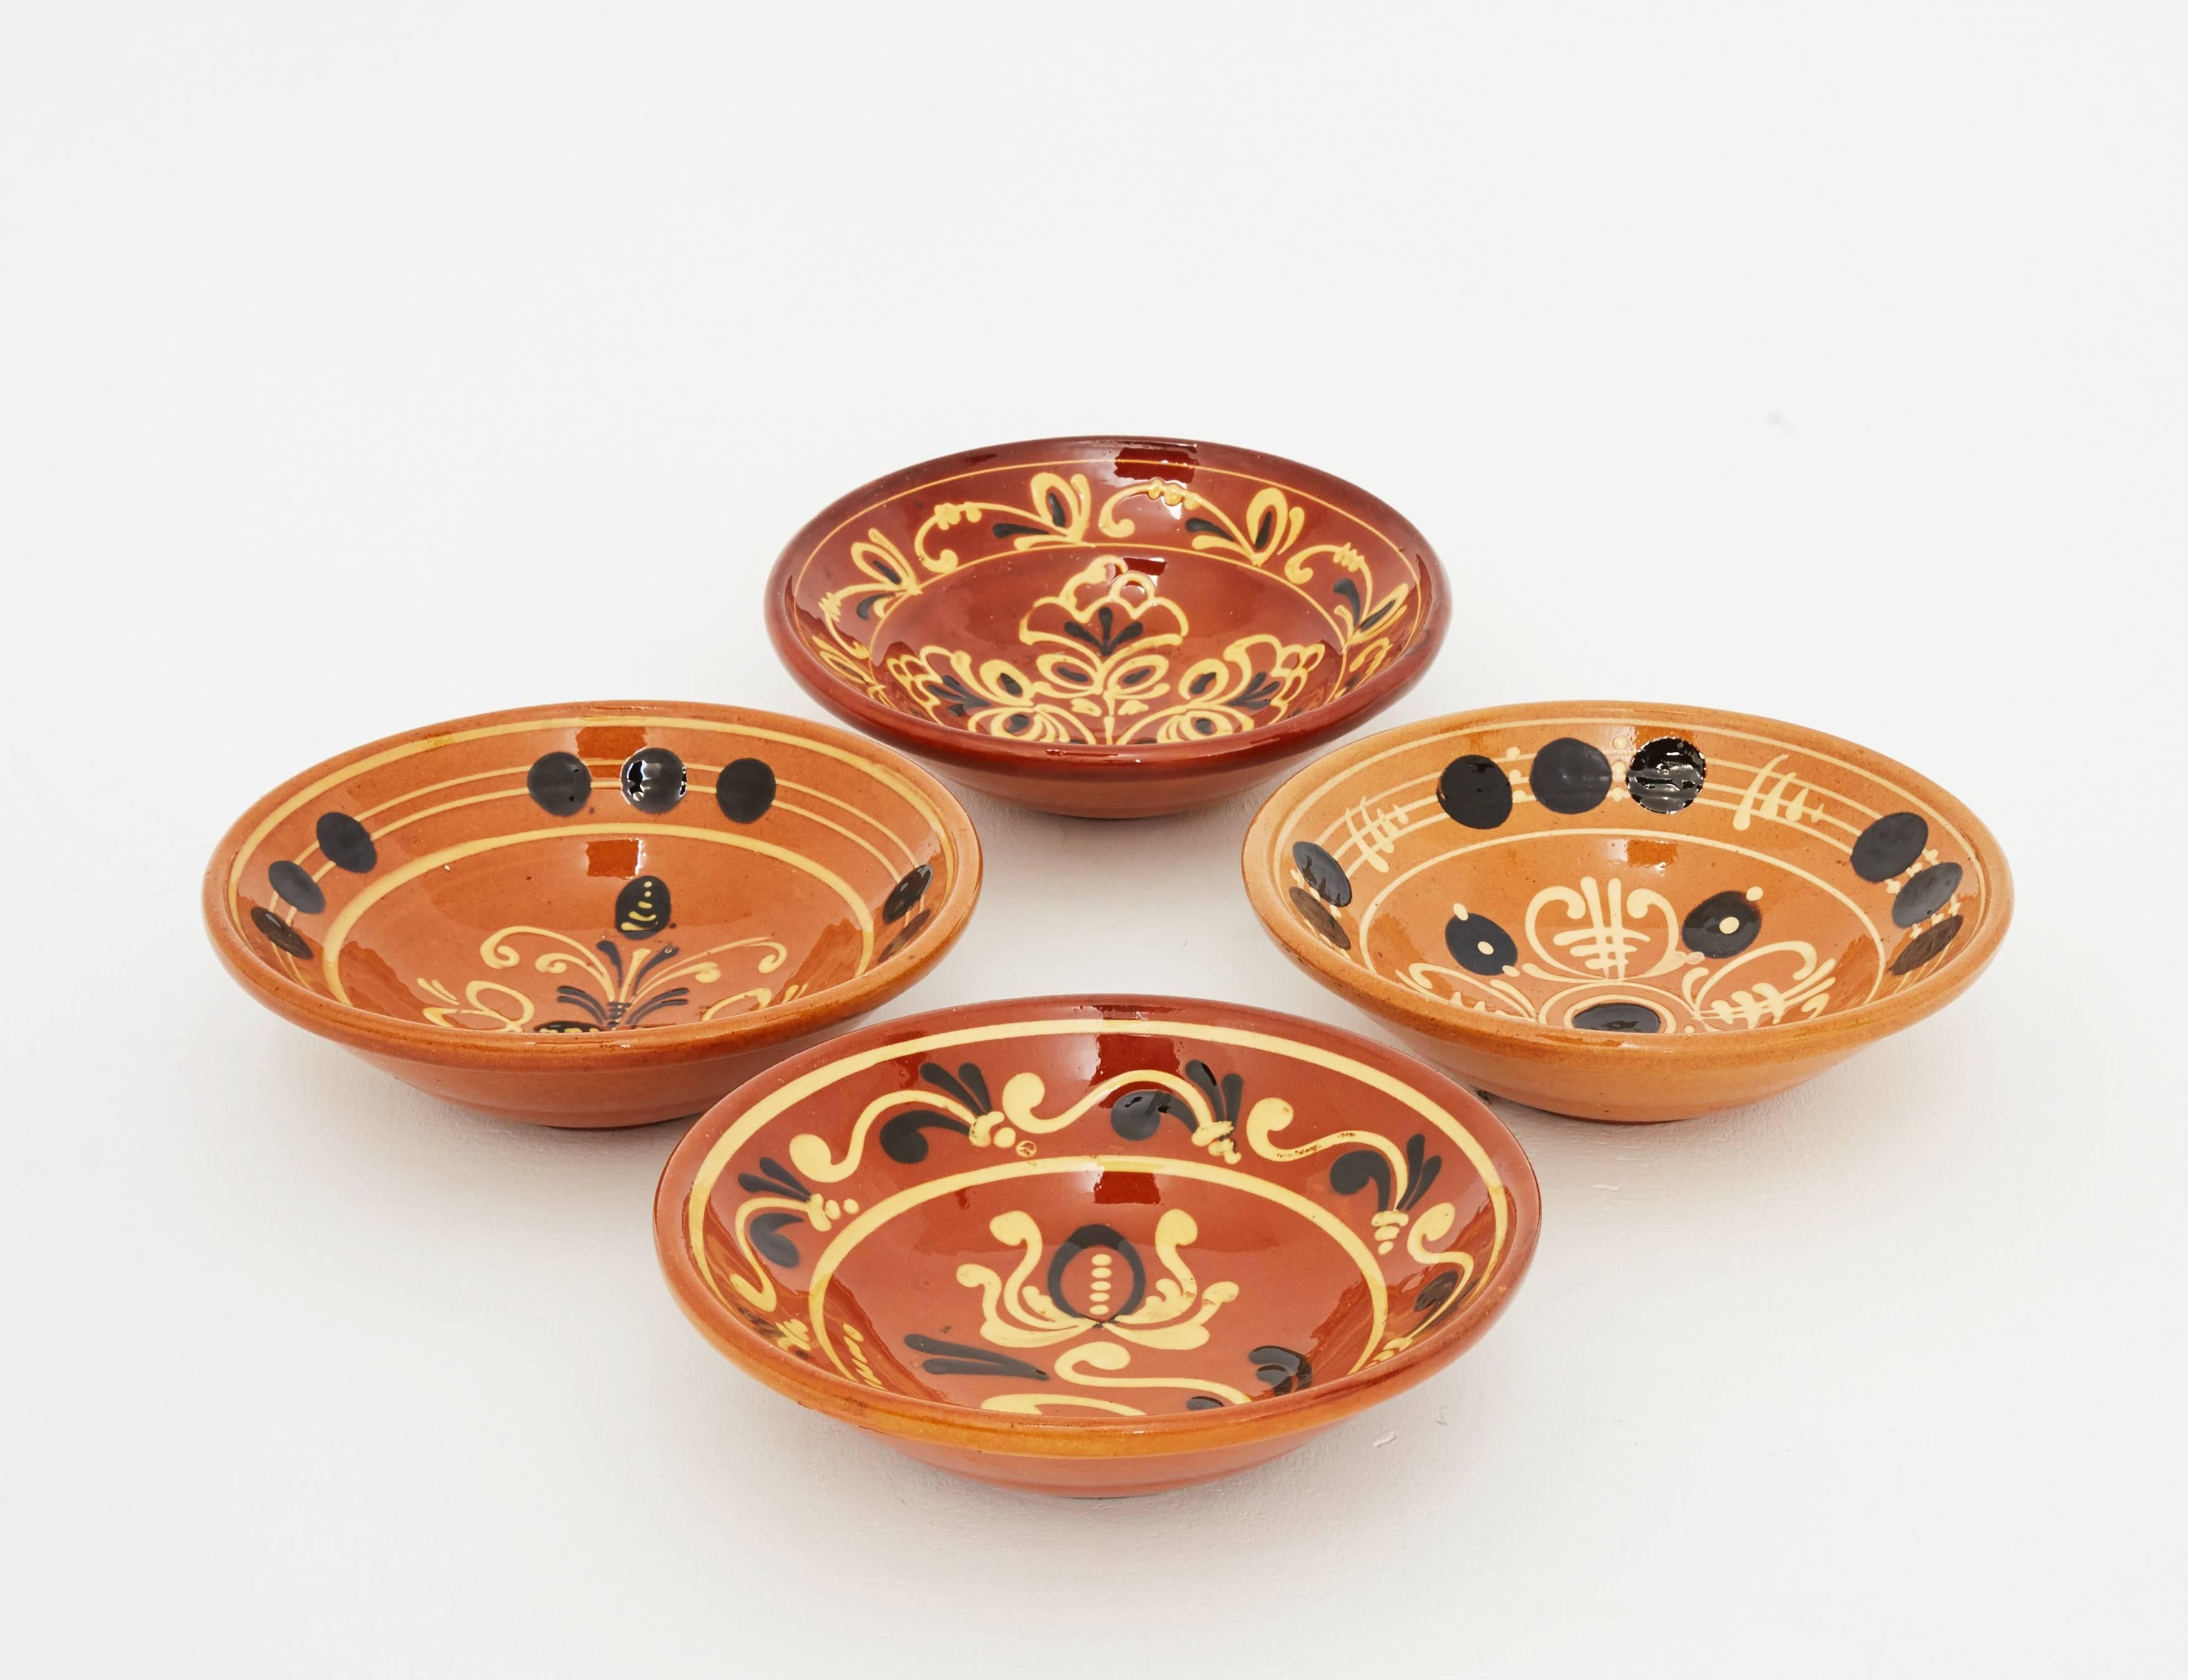 Set of four vintage Hungarian hand-painted plates. These four bowls have a typical decorative motif of the Eastern European terracotta craft tradition. They are glazed and hand-painted and in immaculate conditions. They can be used as serving